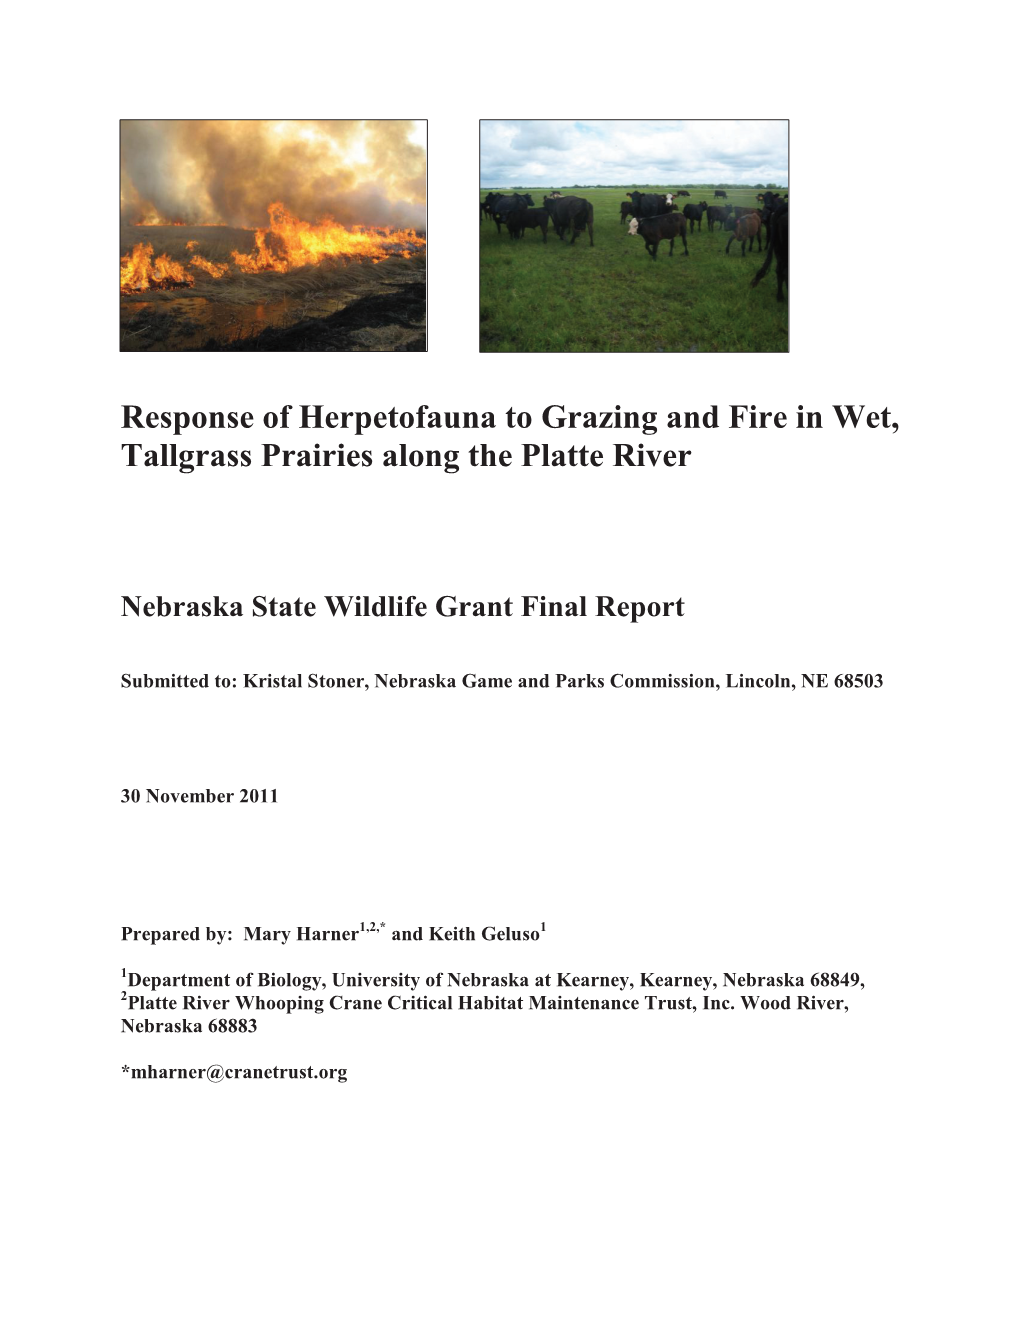 Response of Herpetofauna to Grazing and Fire in Wet, Tallgrass Prairies Along the Platte River